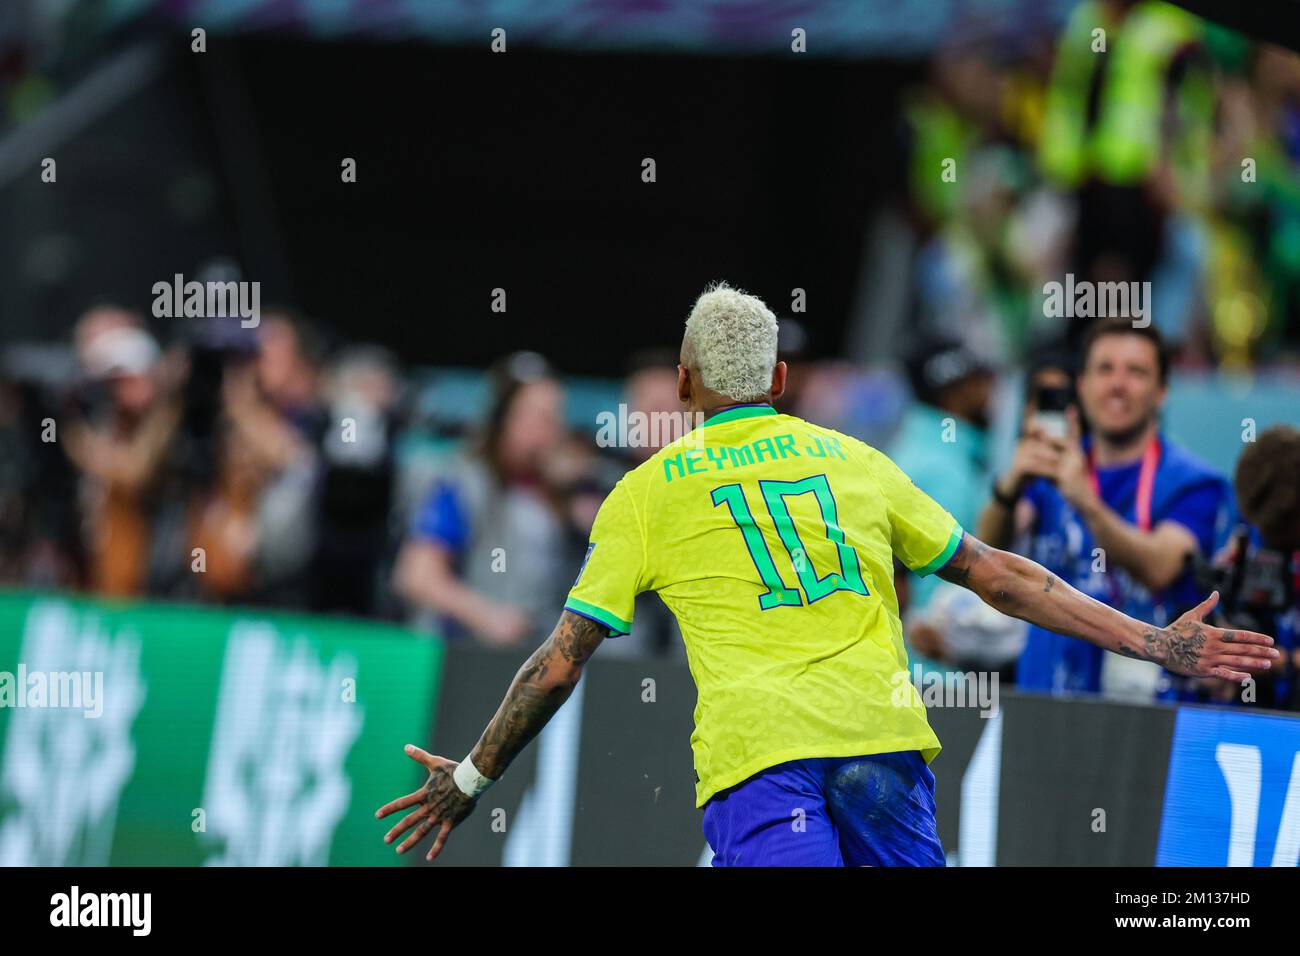 Doha, Qatar. 09th Dec, 2022. Neymar Brazil player during a match against Croatia valid for the quarterfinals of the FIFA World Cup in Qatar at Education City Stadium in Doha, Qatar. December 9, 2022 Photo:William Volcov Credit: Brazil Photo Press/Alamy Live News Stock Photo